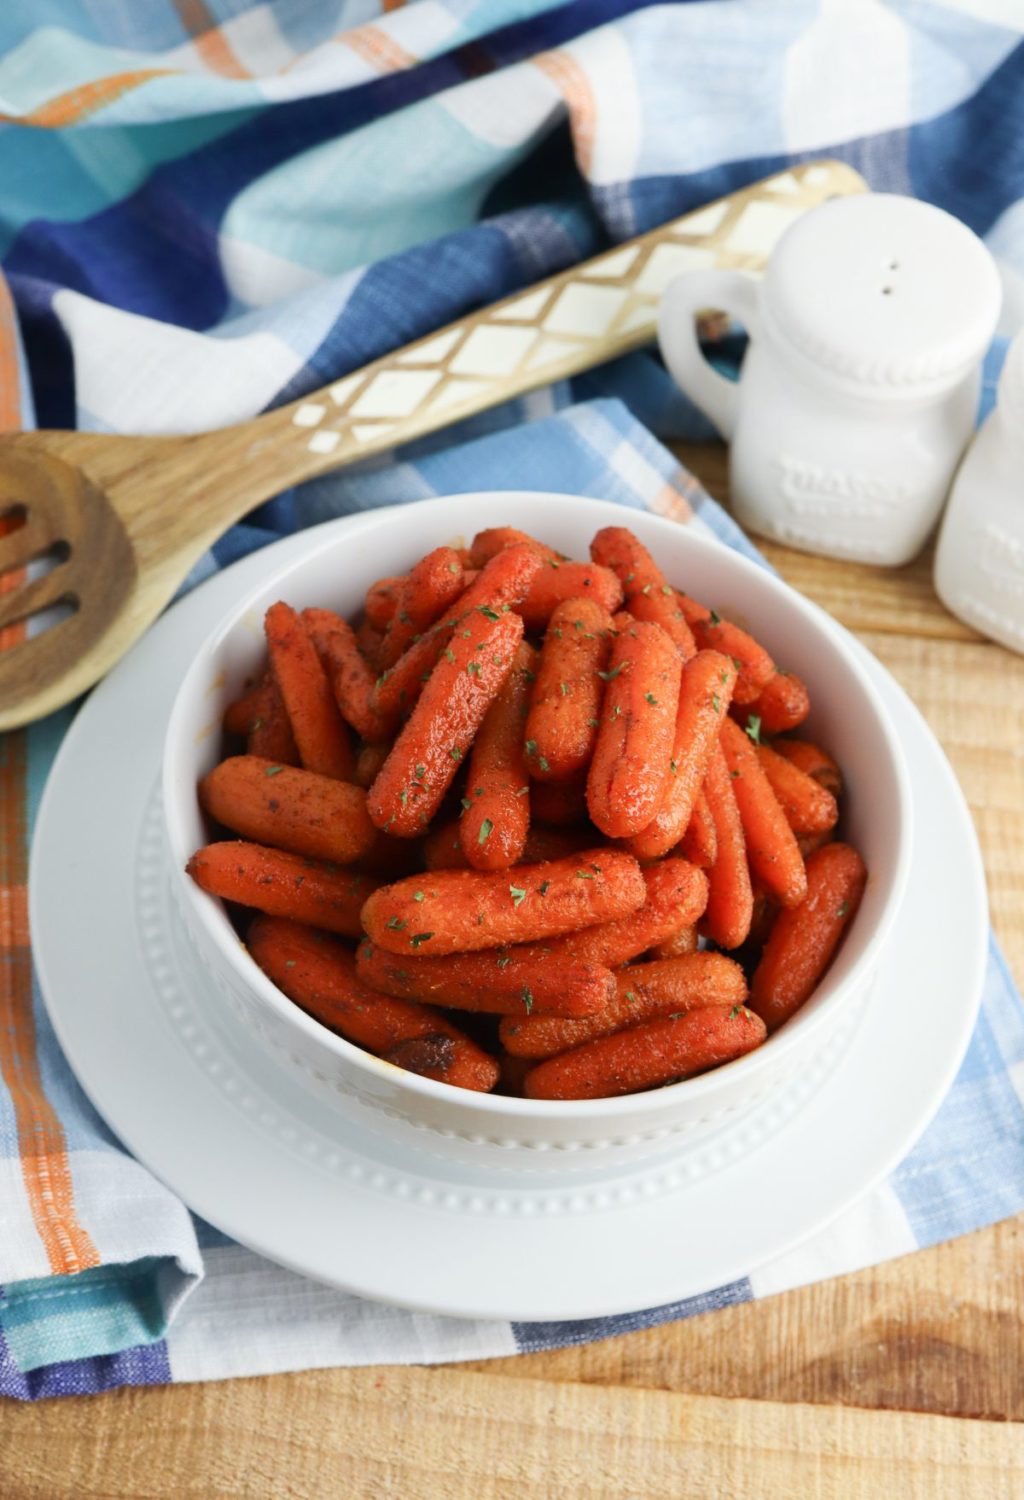 Roasted carrots in a white bowl on a table.